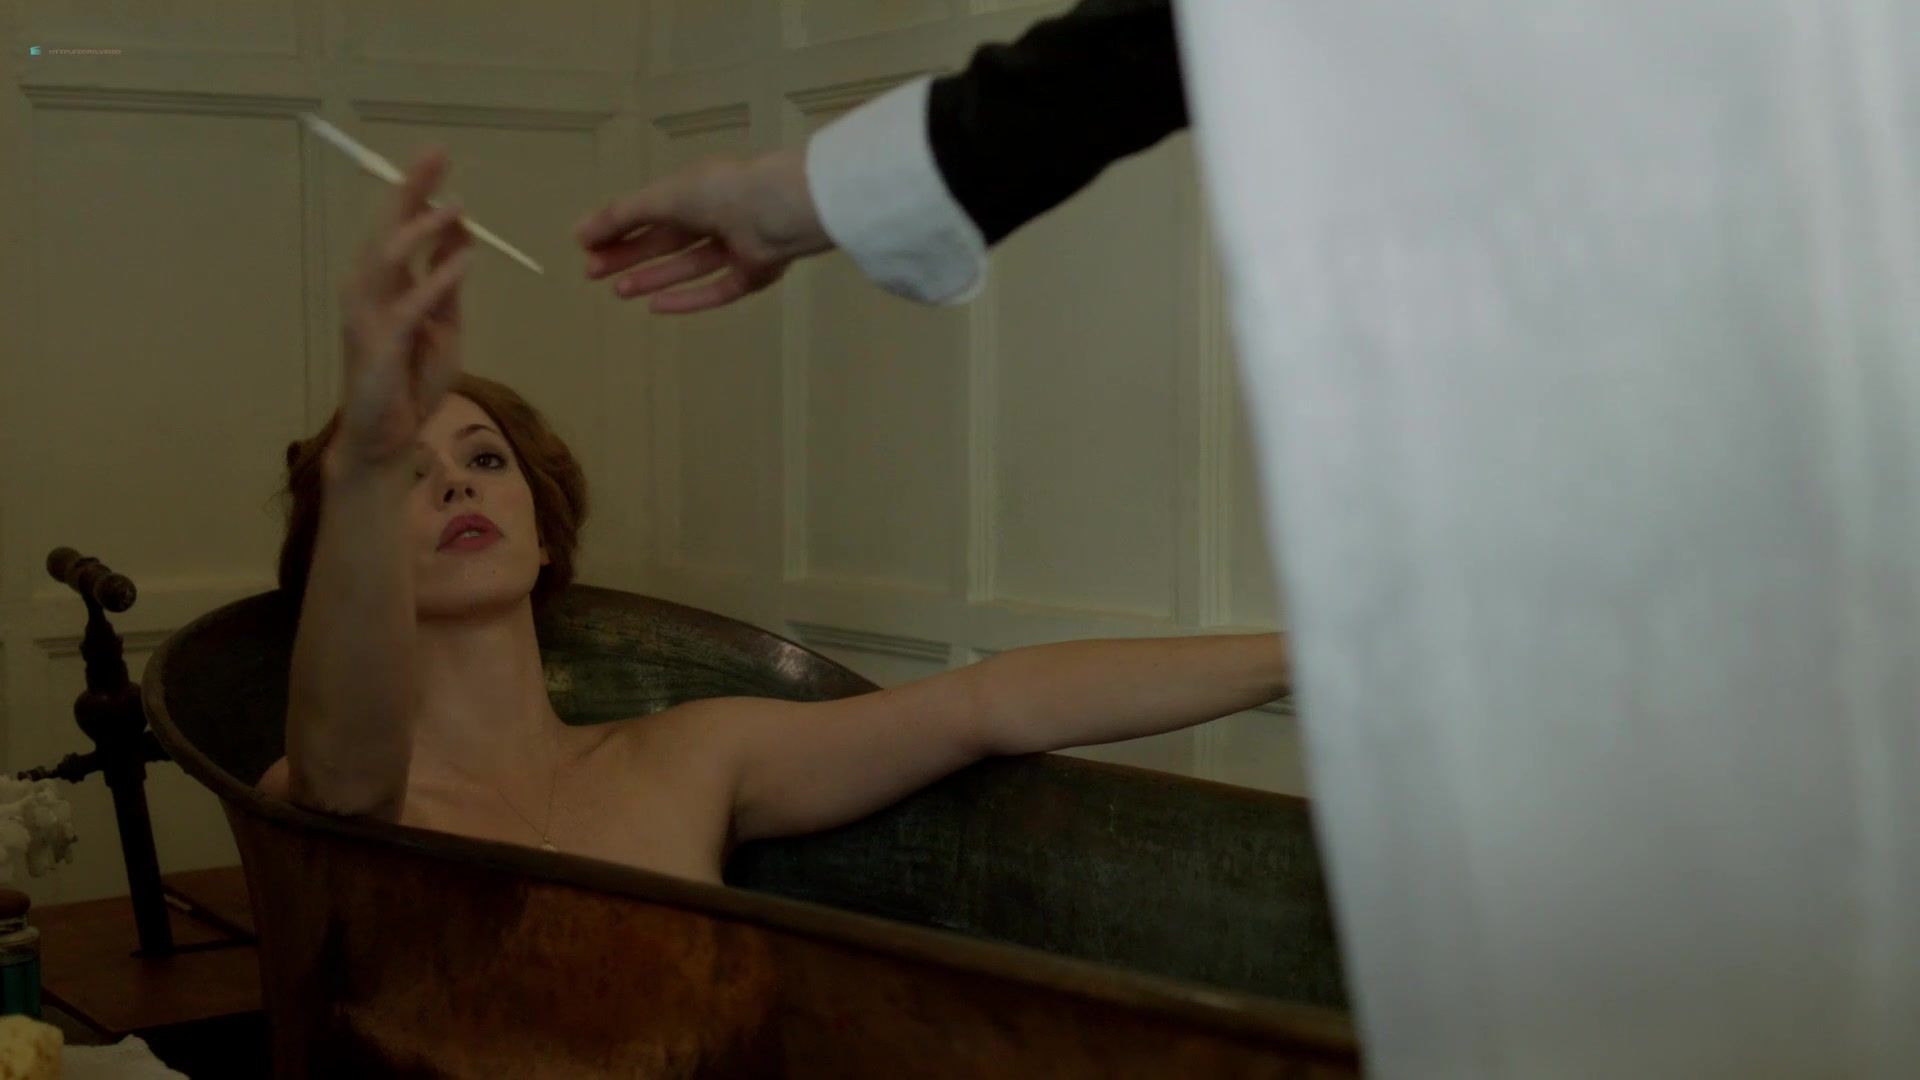 Gay Outdoor Rebecca Hall, Adelaide Clemens nude - Parades End (2012) Sexvideo - 1